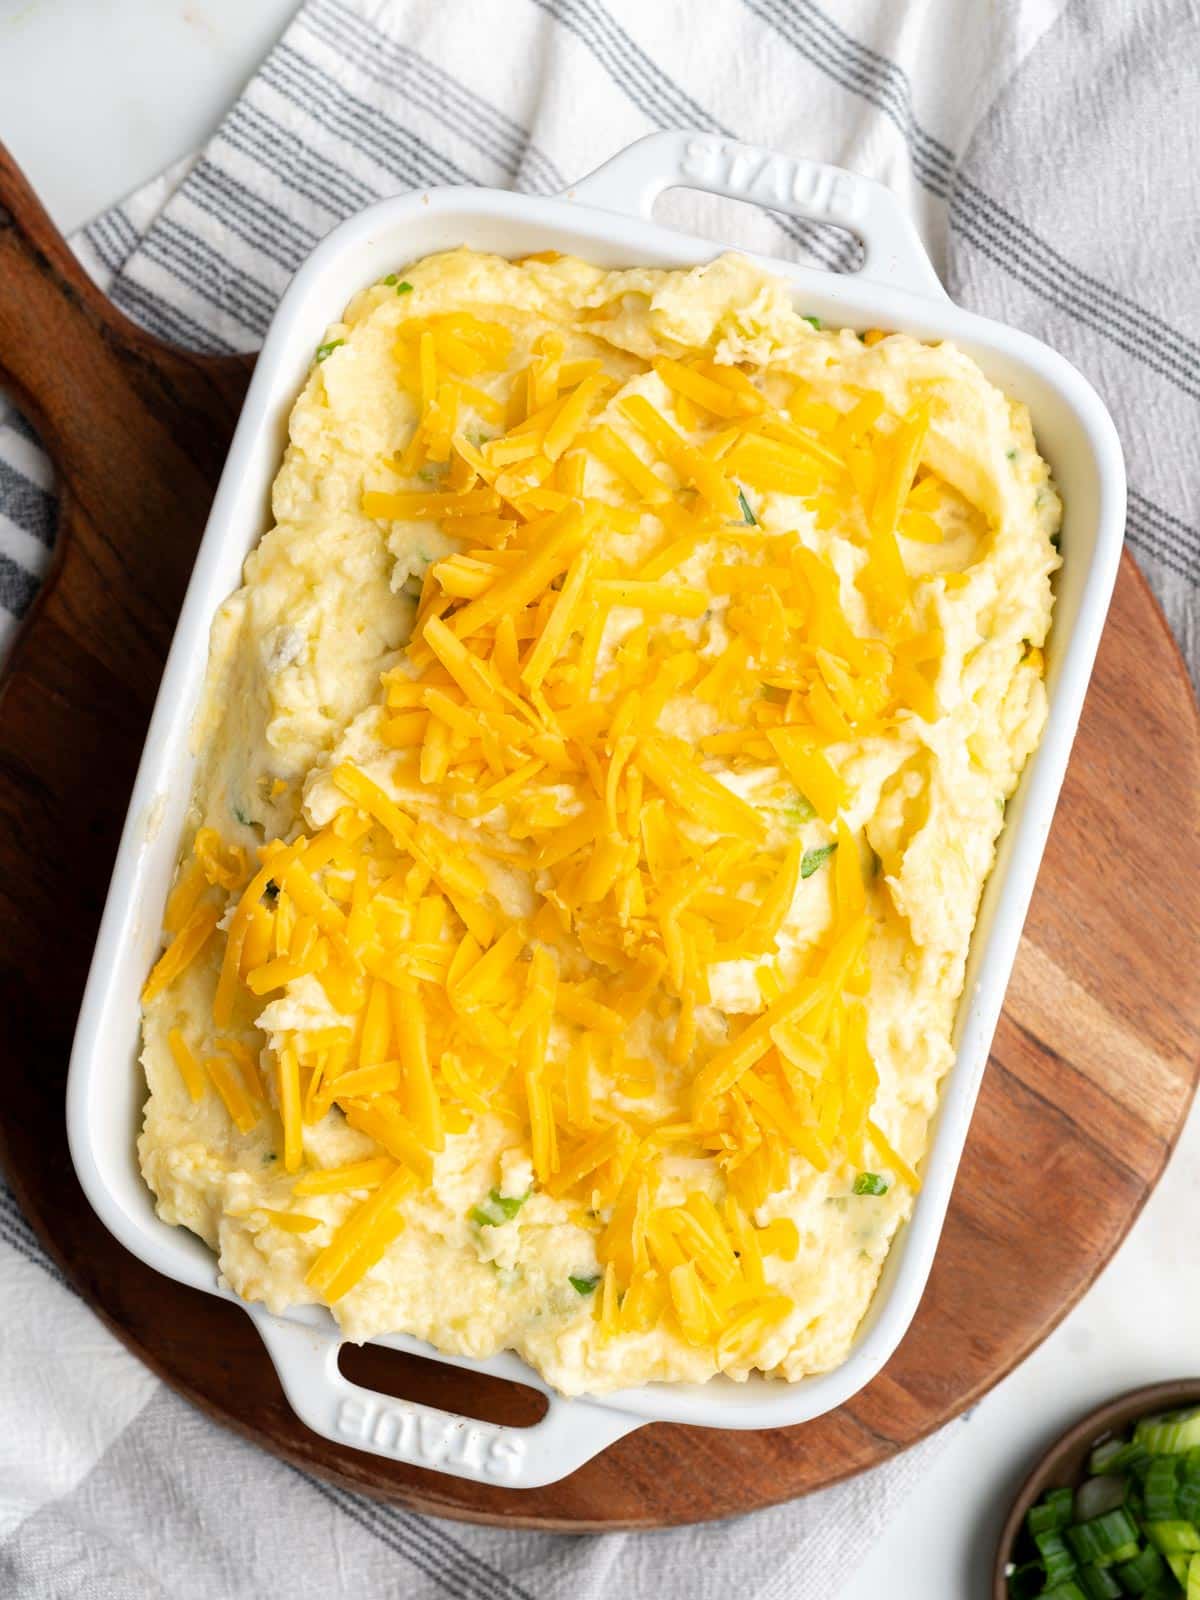 Mashed potatoes topped with cheese in a baking dish.